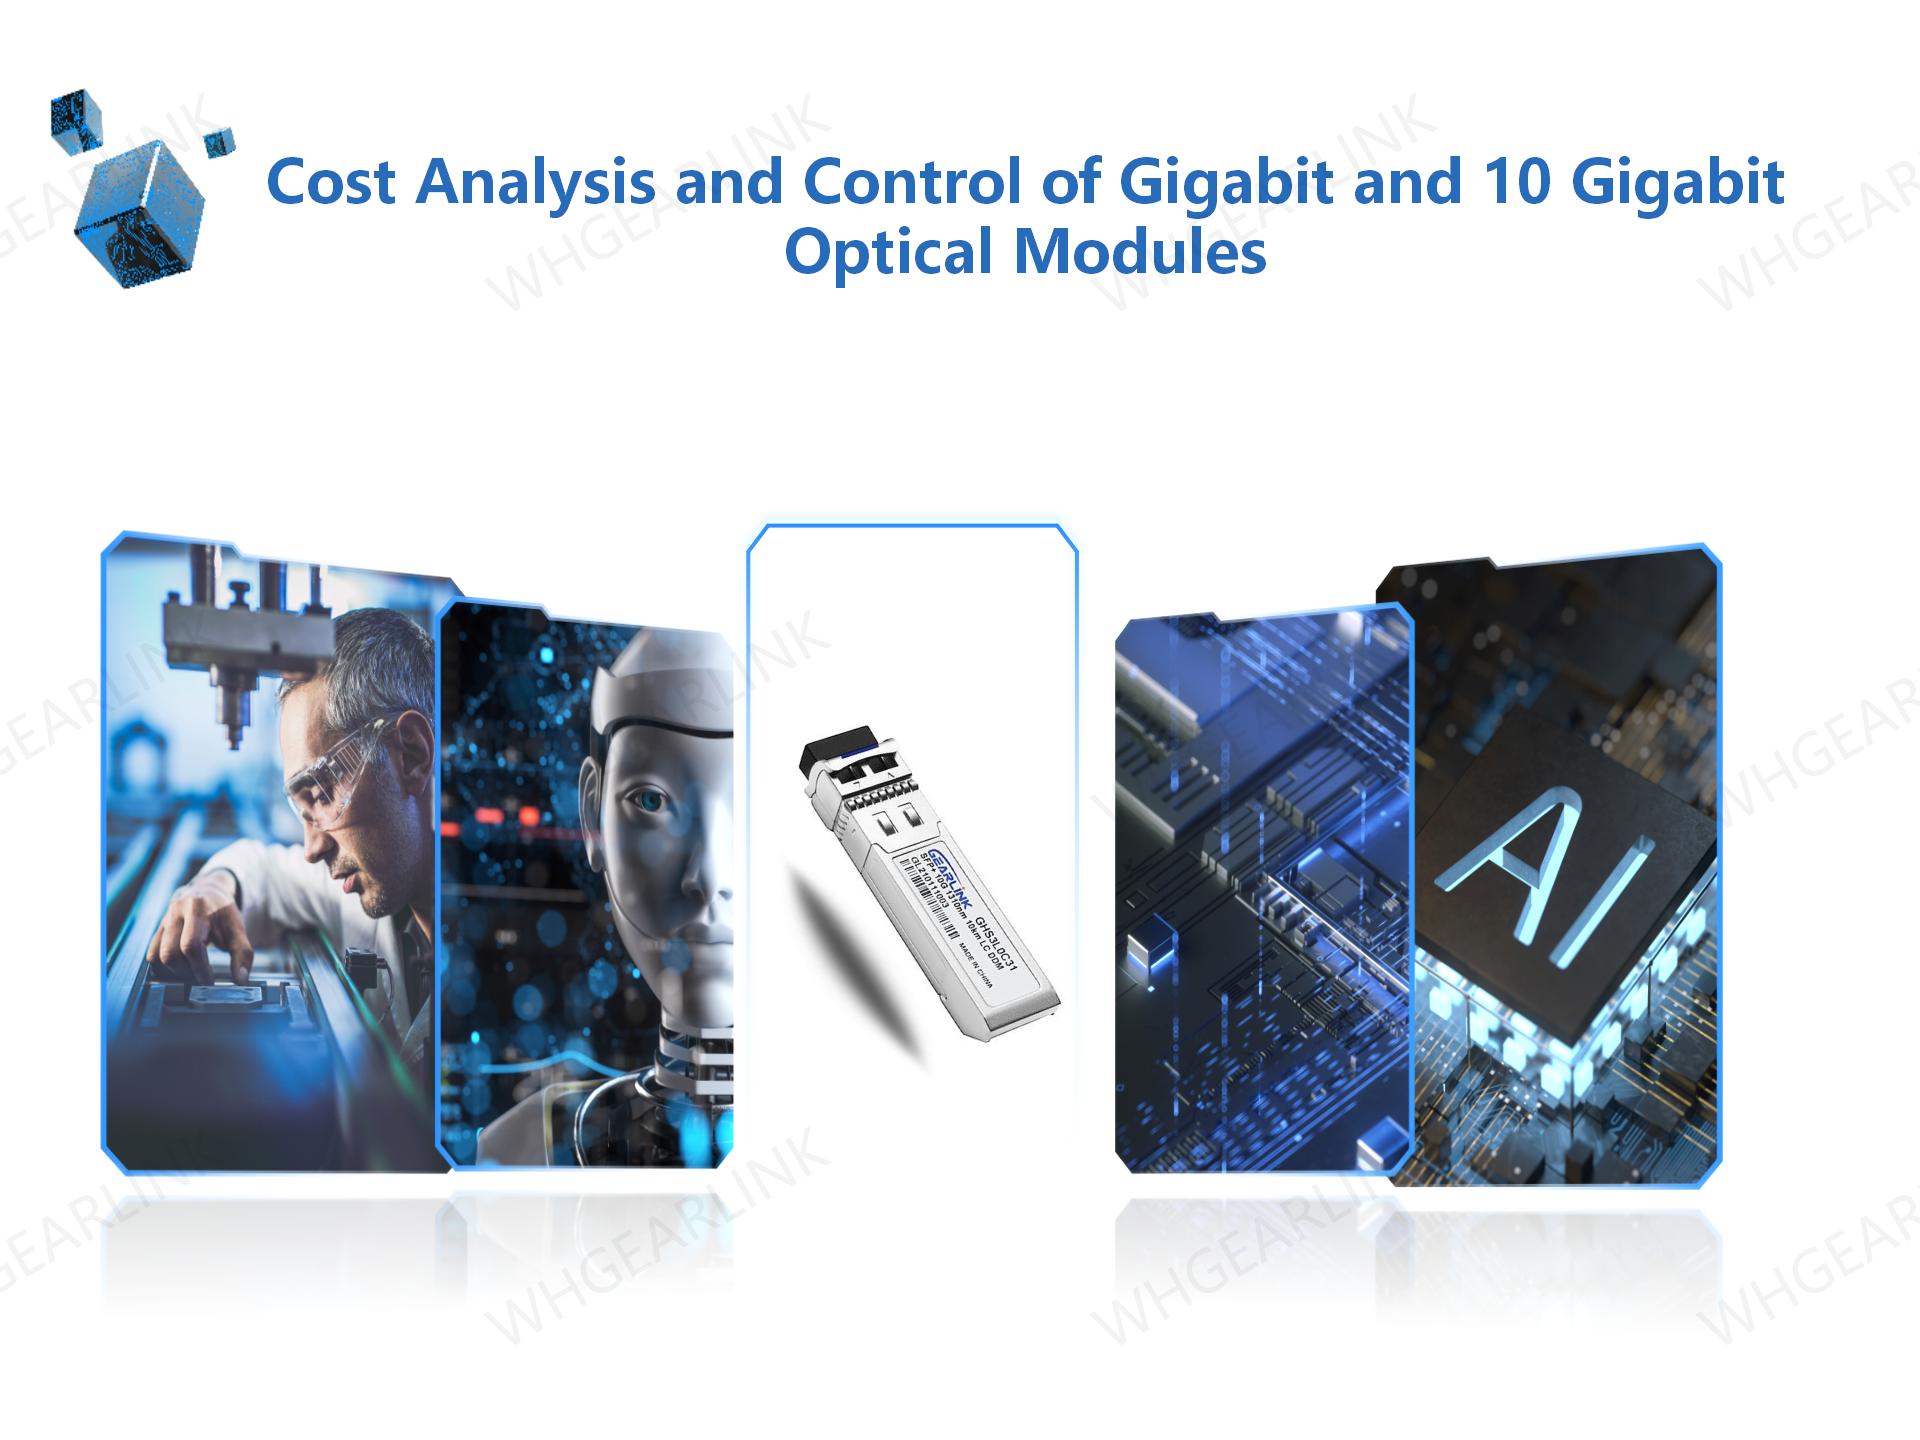 Cost Analysis and Control of Gigabit and 10 Gigabit Optical Modules